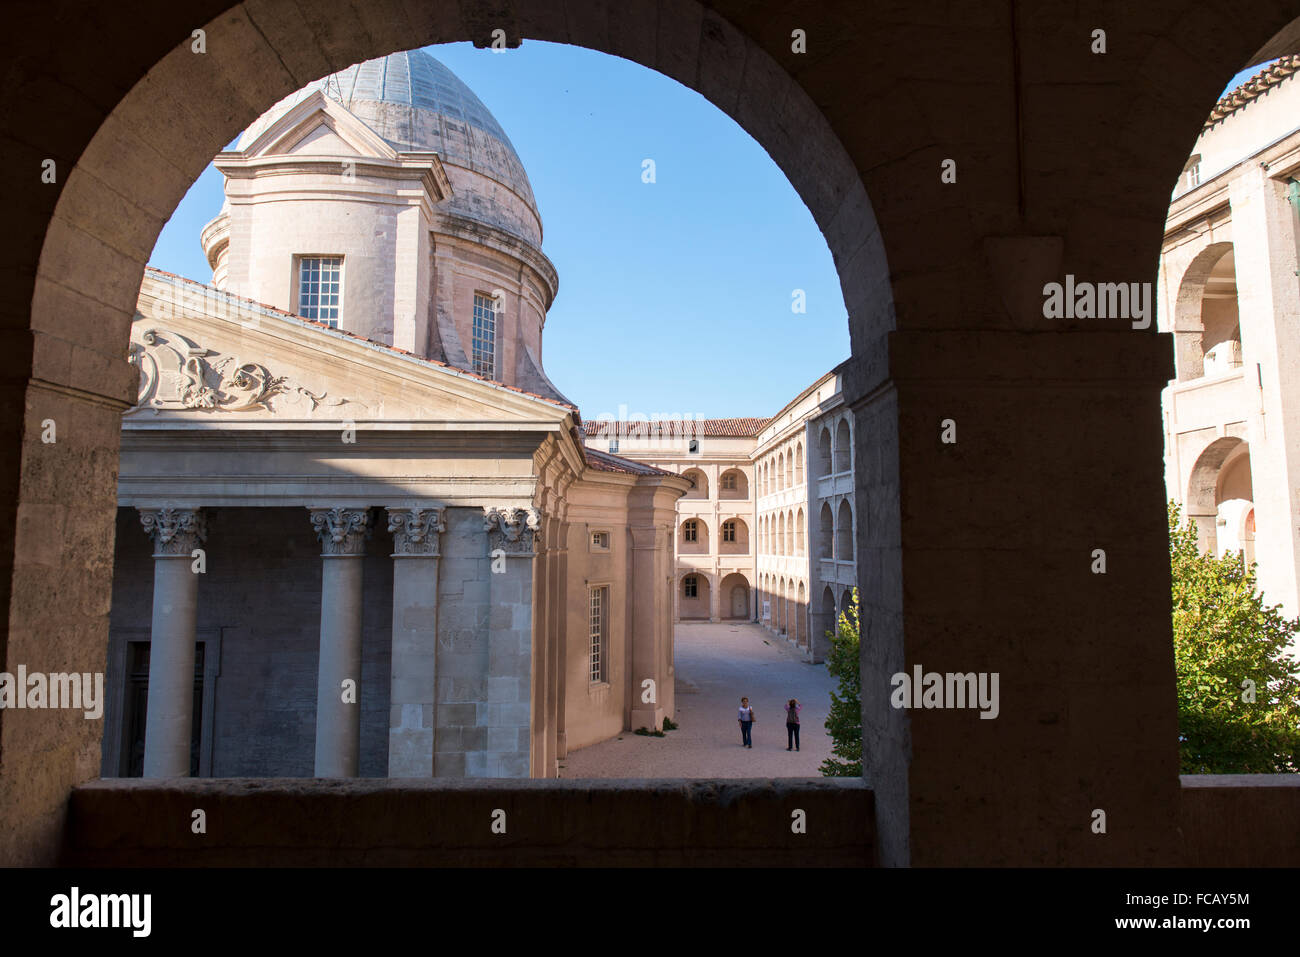 View through an archway at La Vieille Charite in the Panier neighborhood of Marseille, France. Stock Photo